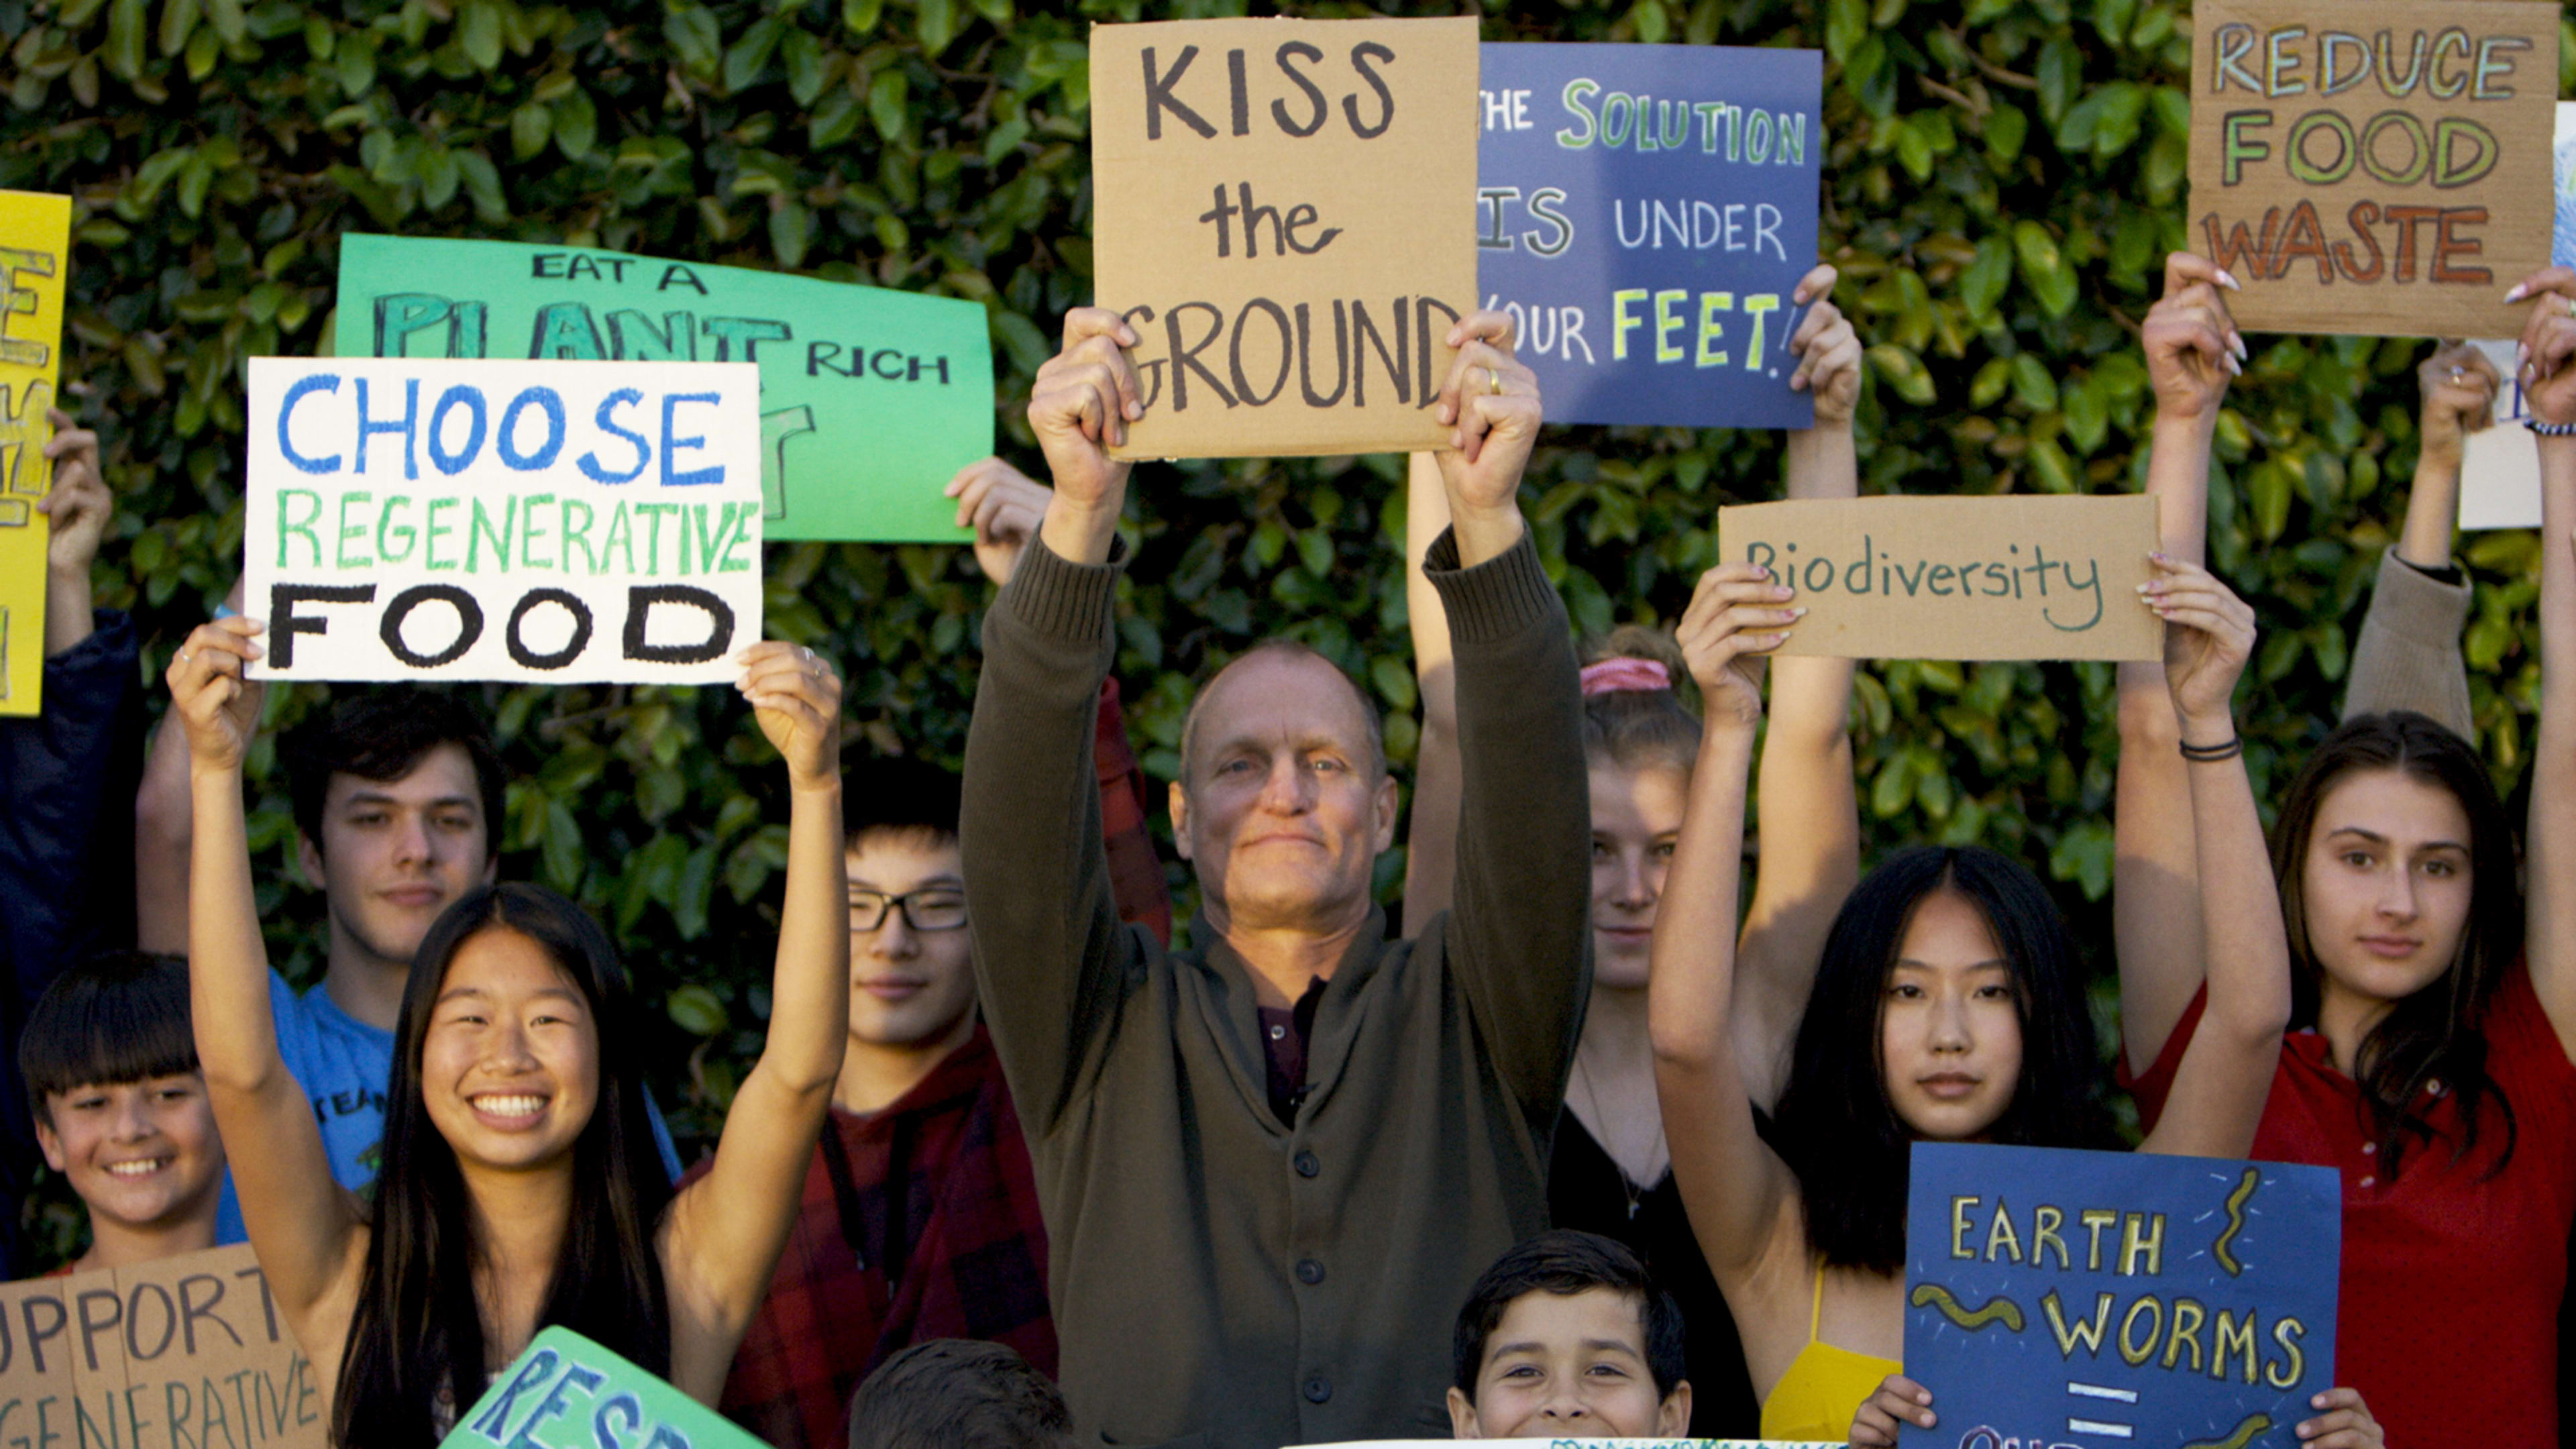 Netflix’s regenerative agriculture doc ‘Kiss the Ground’ aims to be climate-skeptic-proof